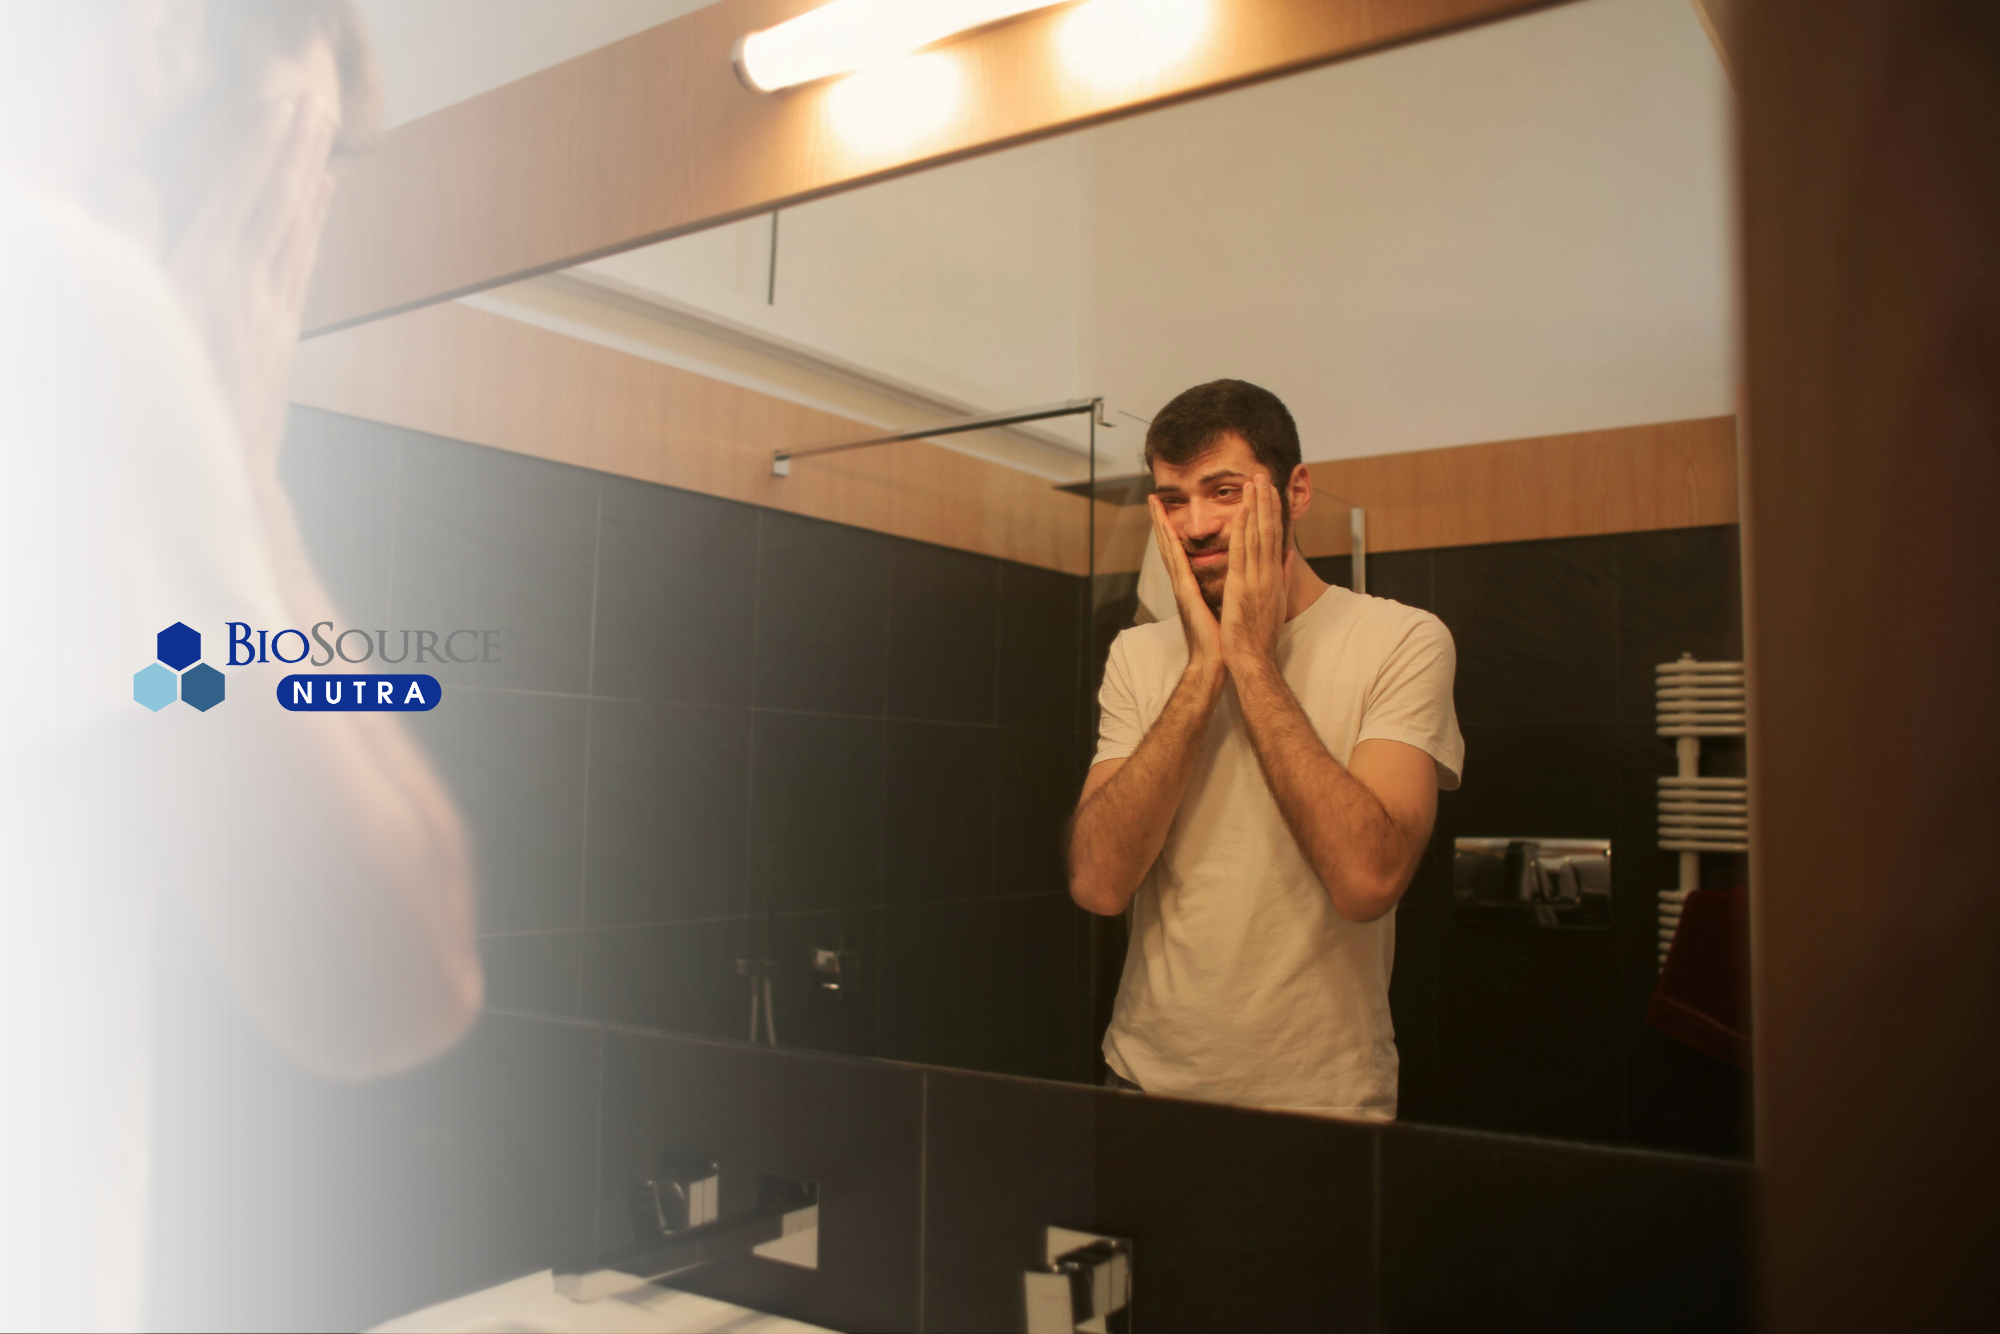 A young man stares at his exhausted reflection